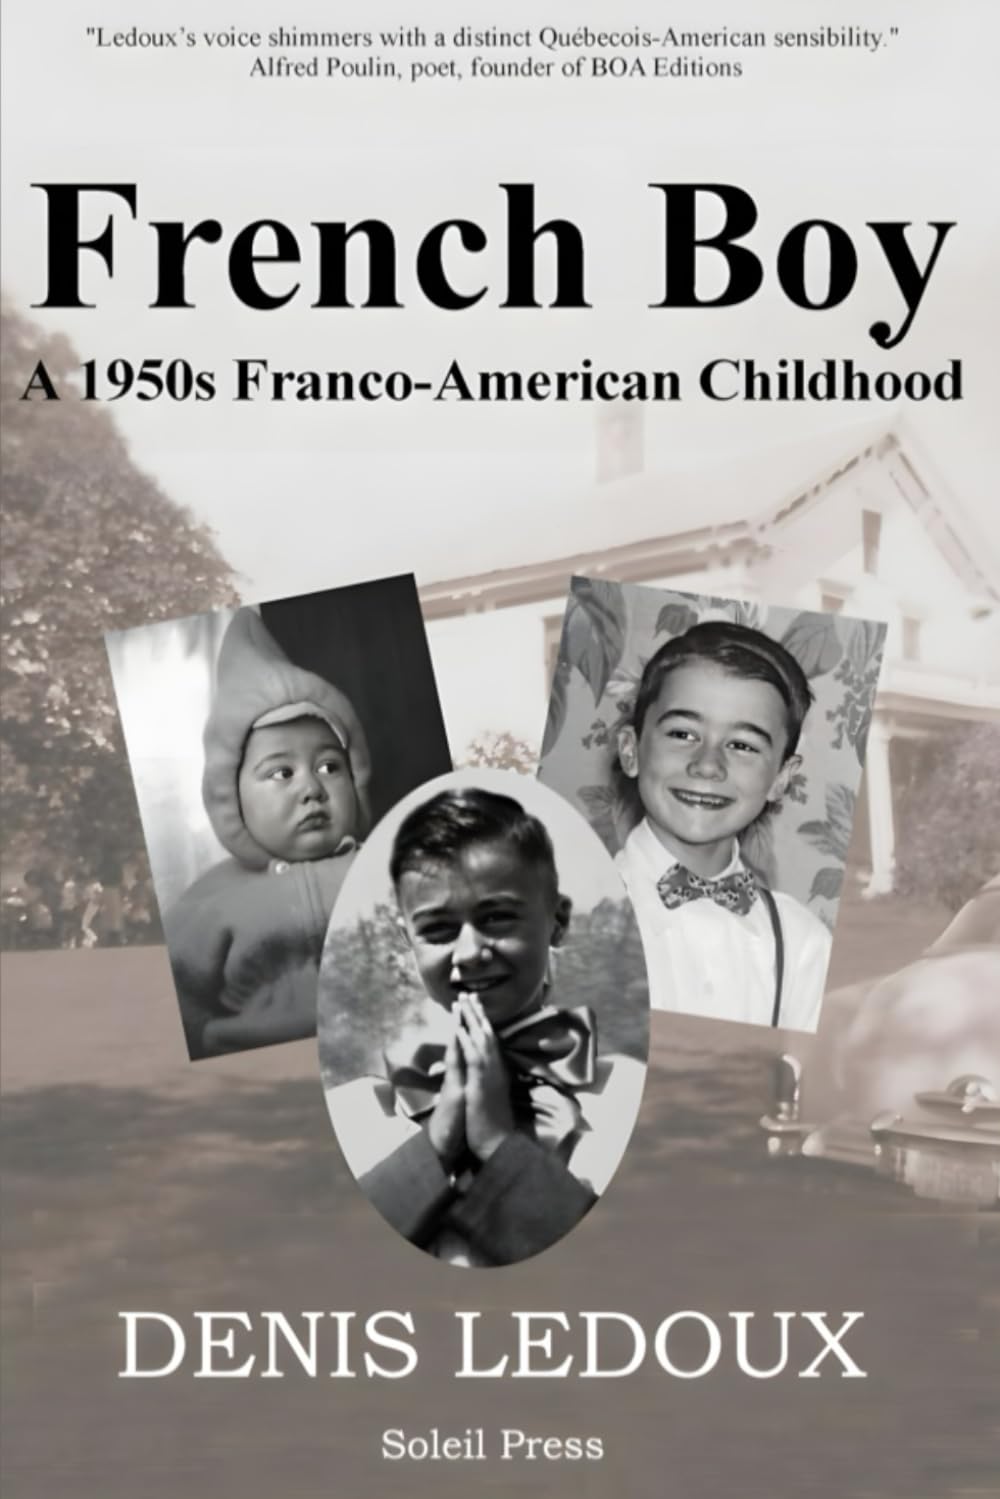 French Boy: A 1950s Franco-American Childhood (Books about Franco-Americans)